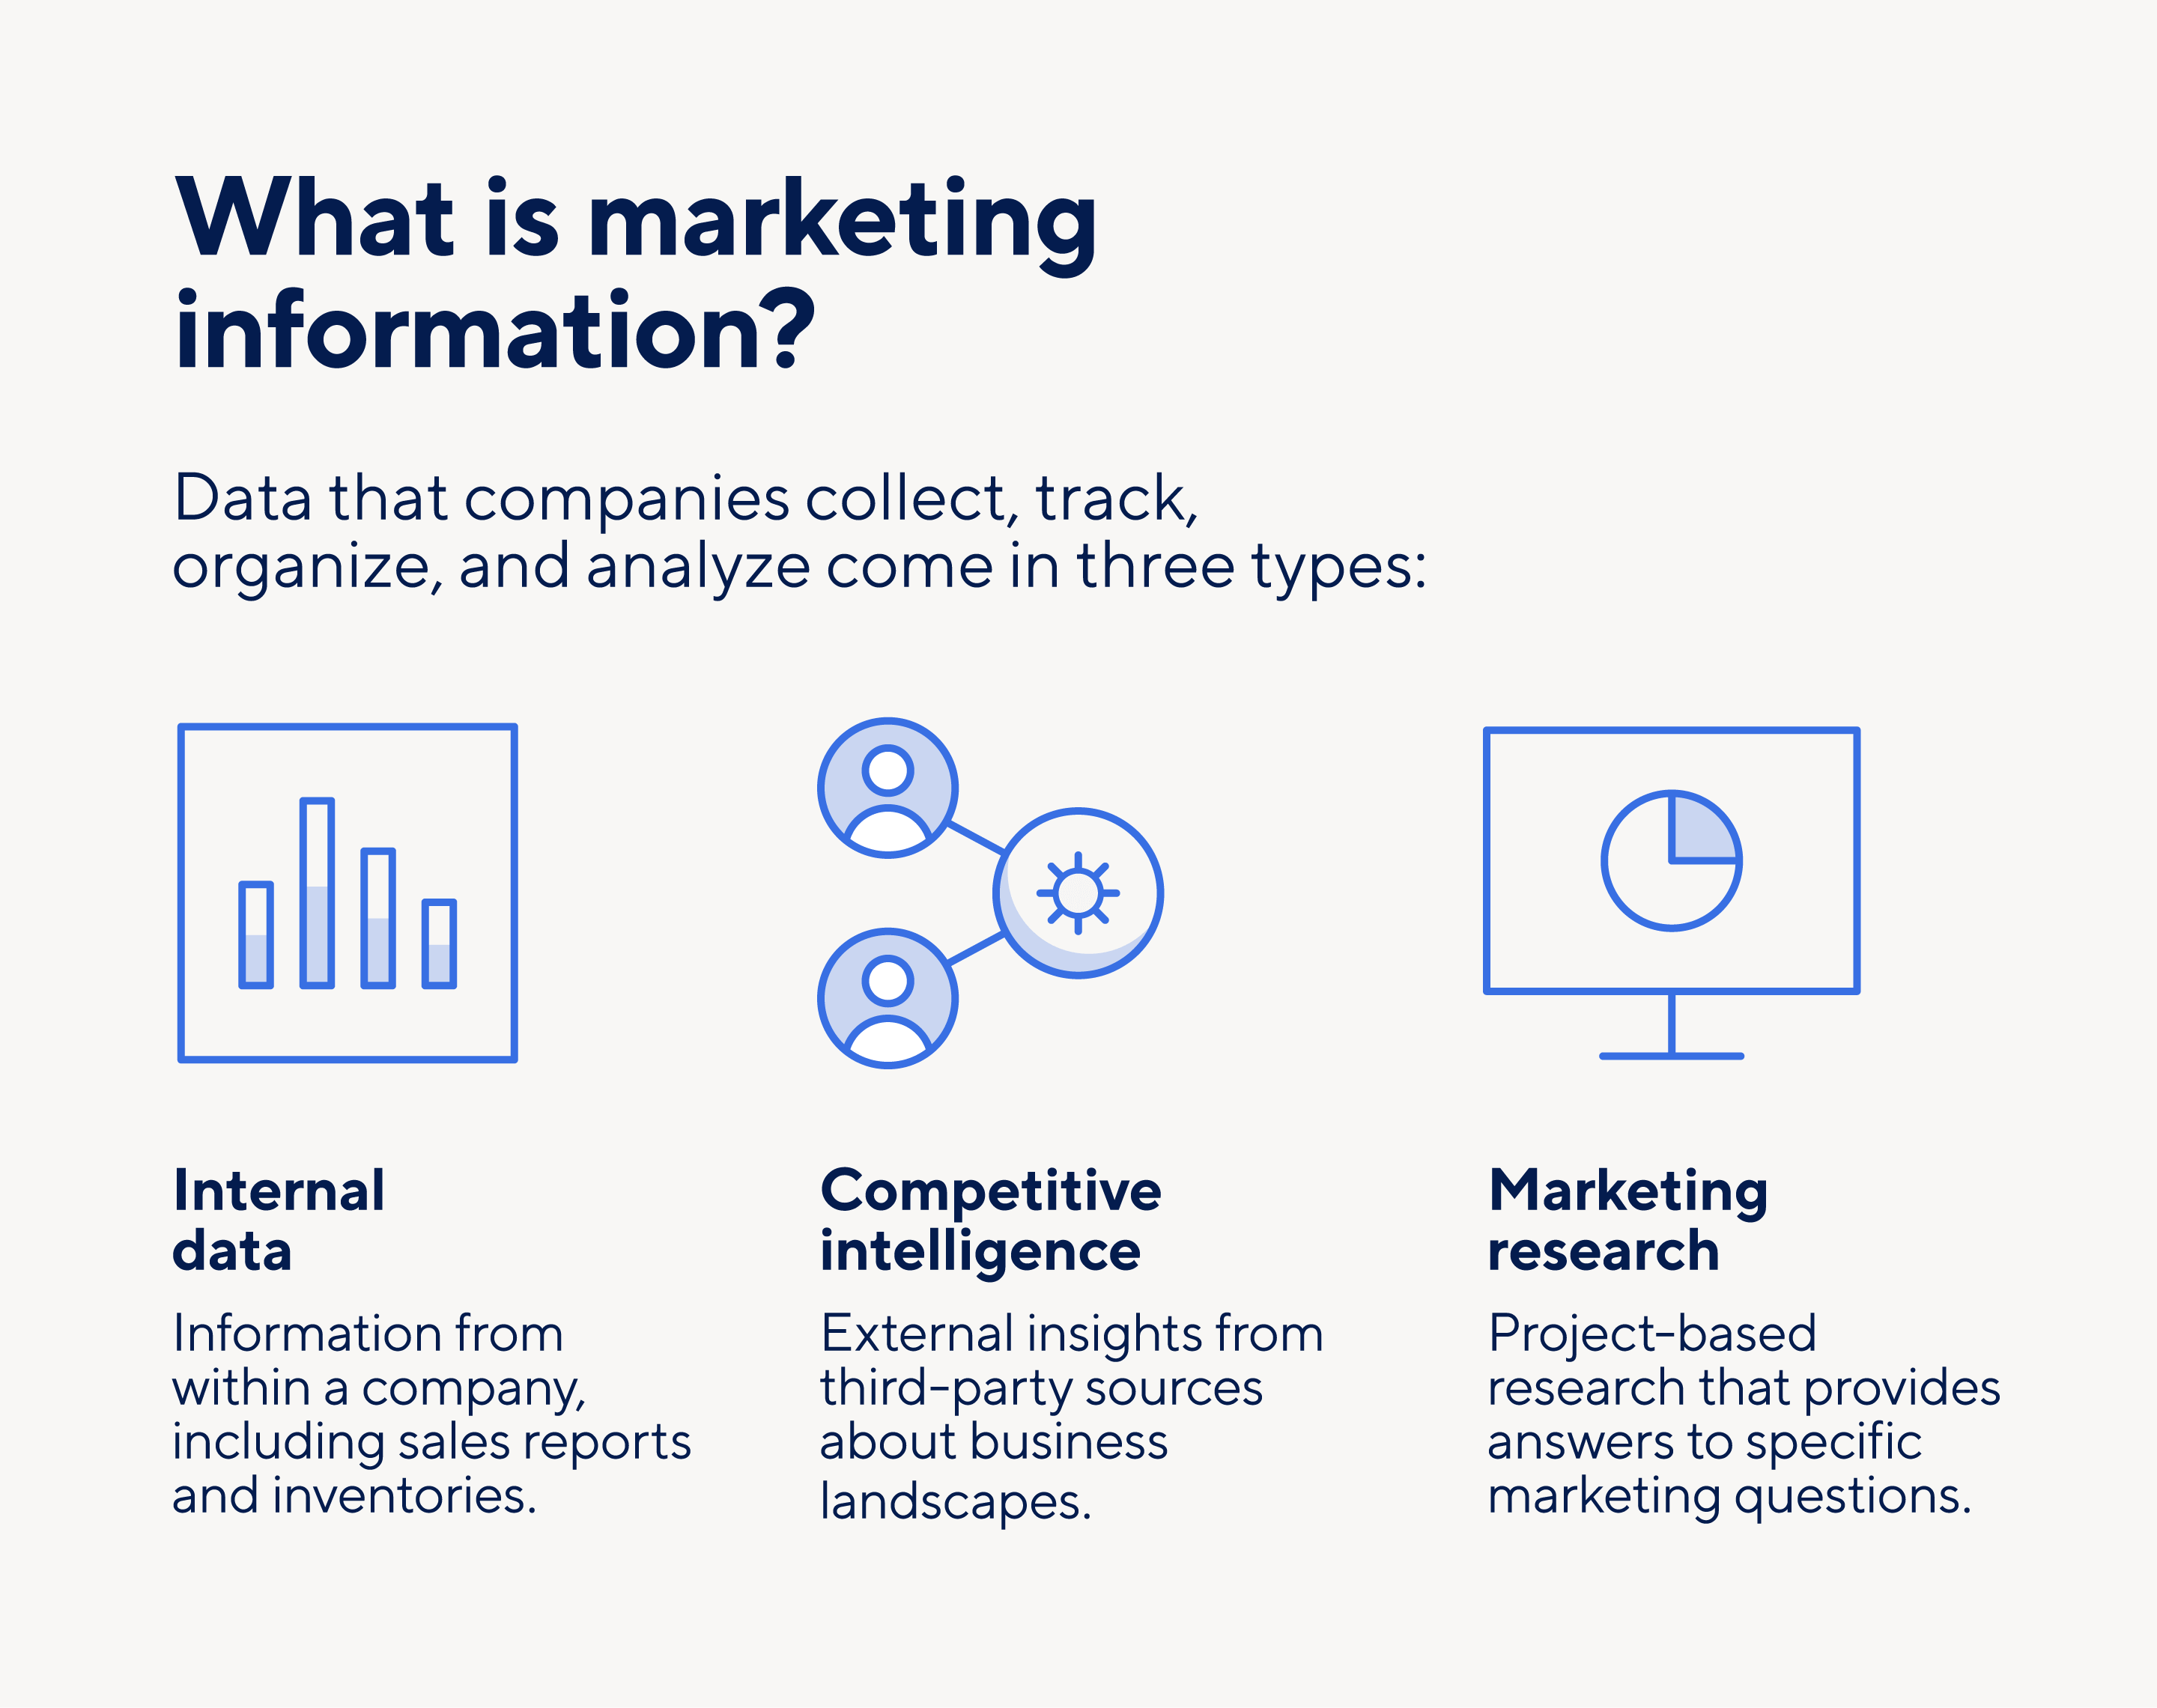 Icons that illustrate and define marketing information, including internal data, competitive intelligence, and marketing research.